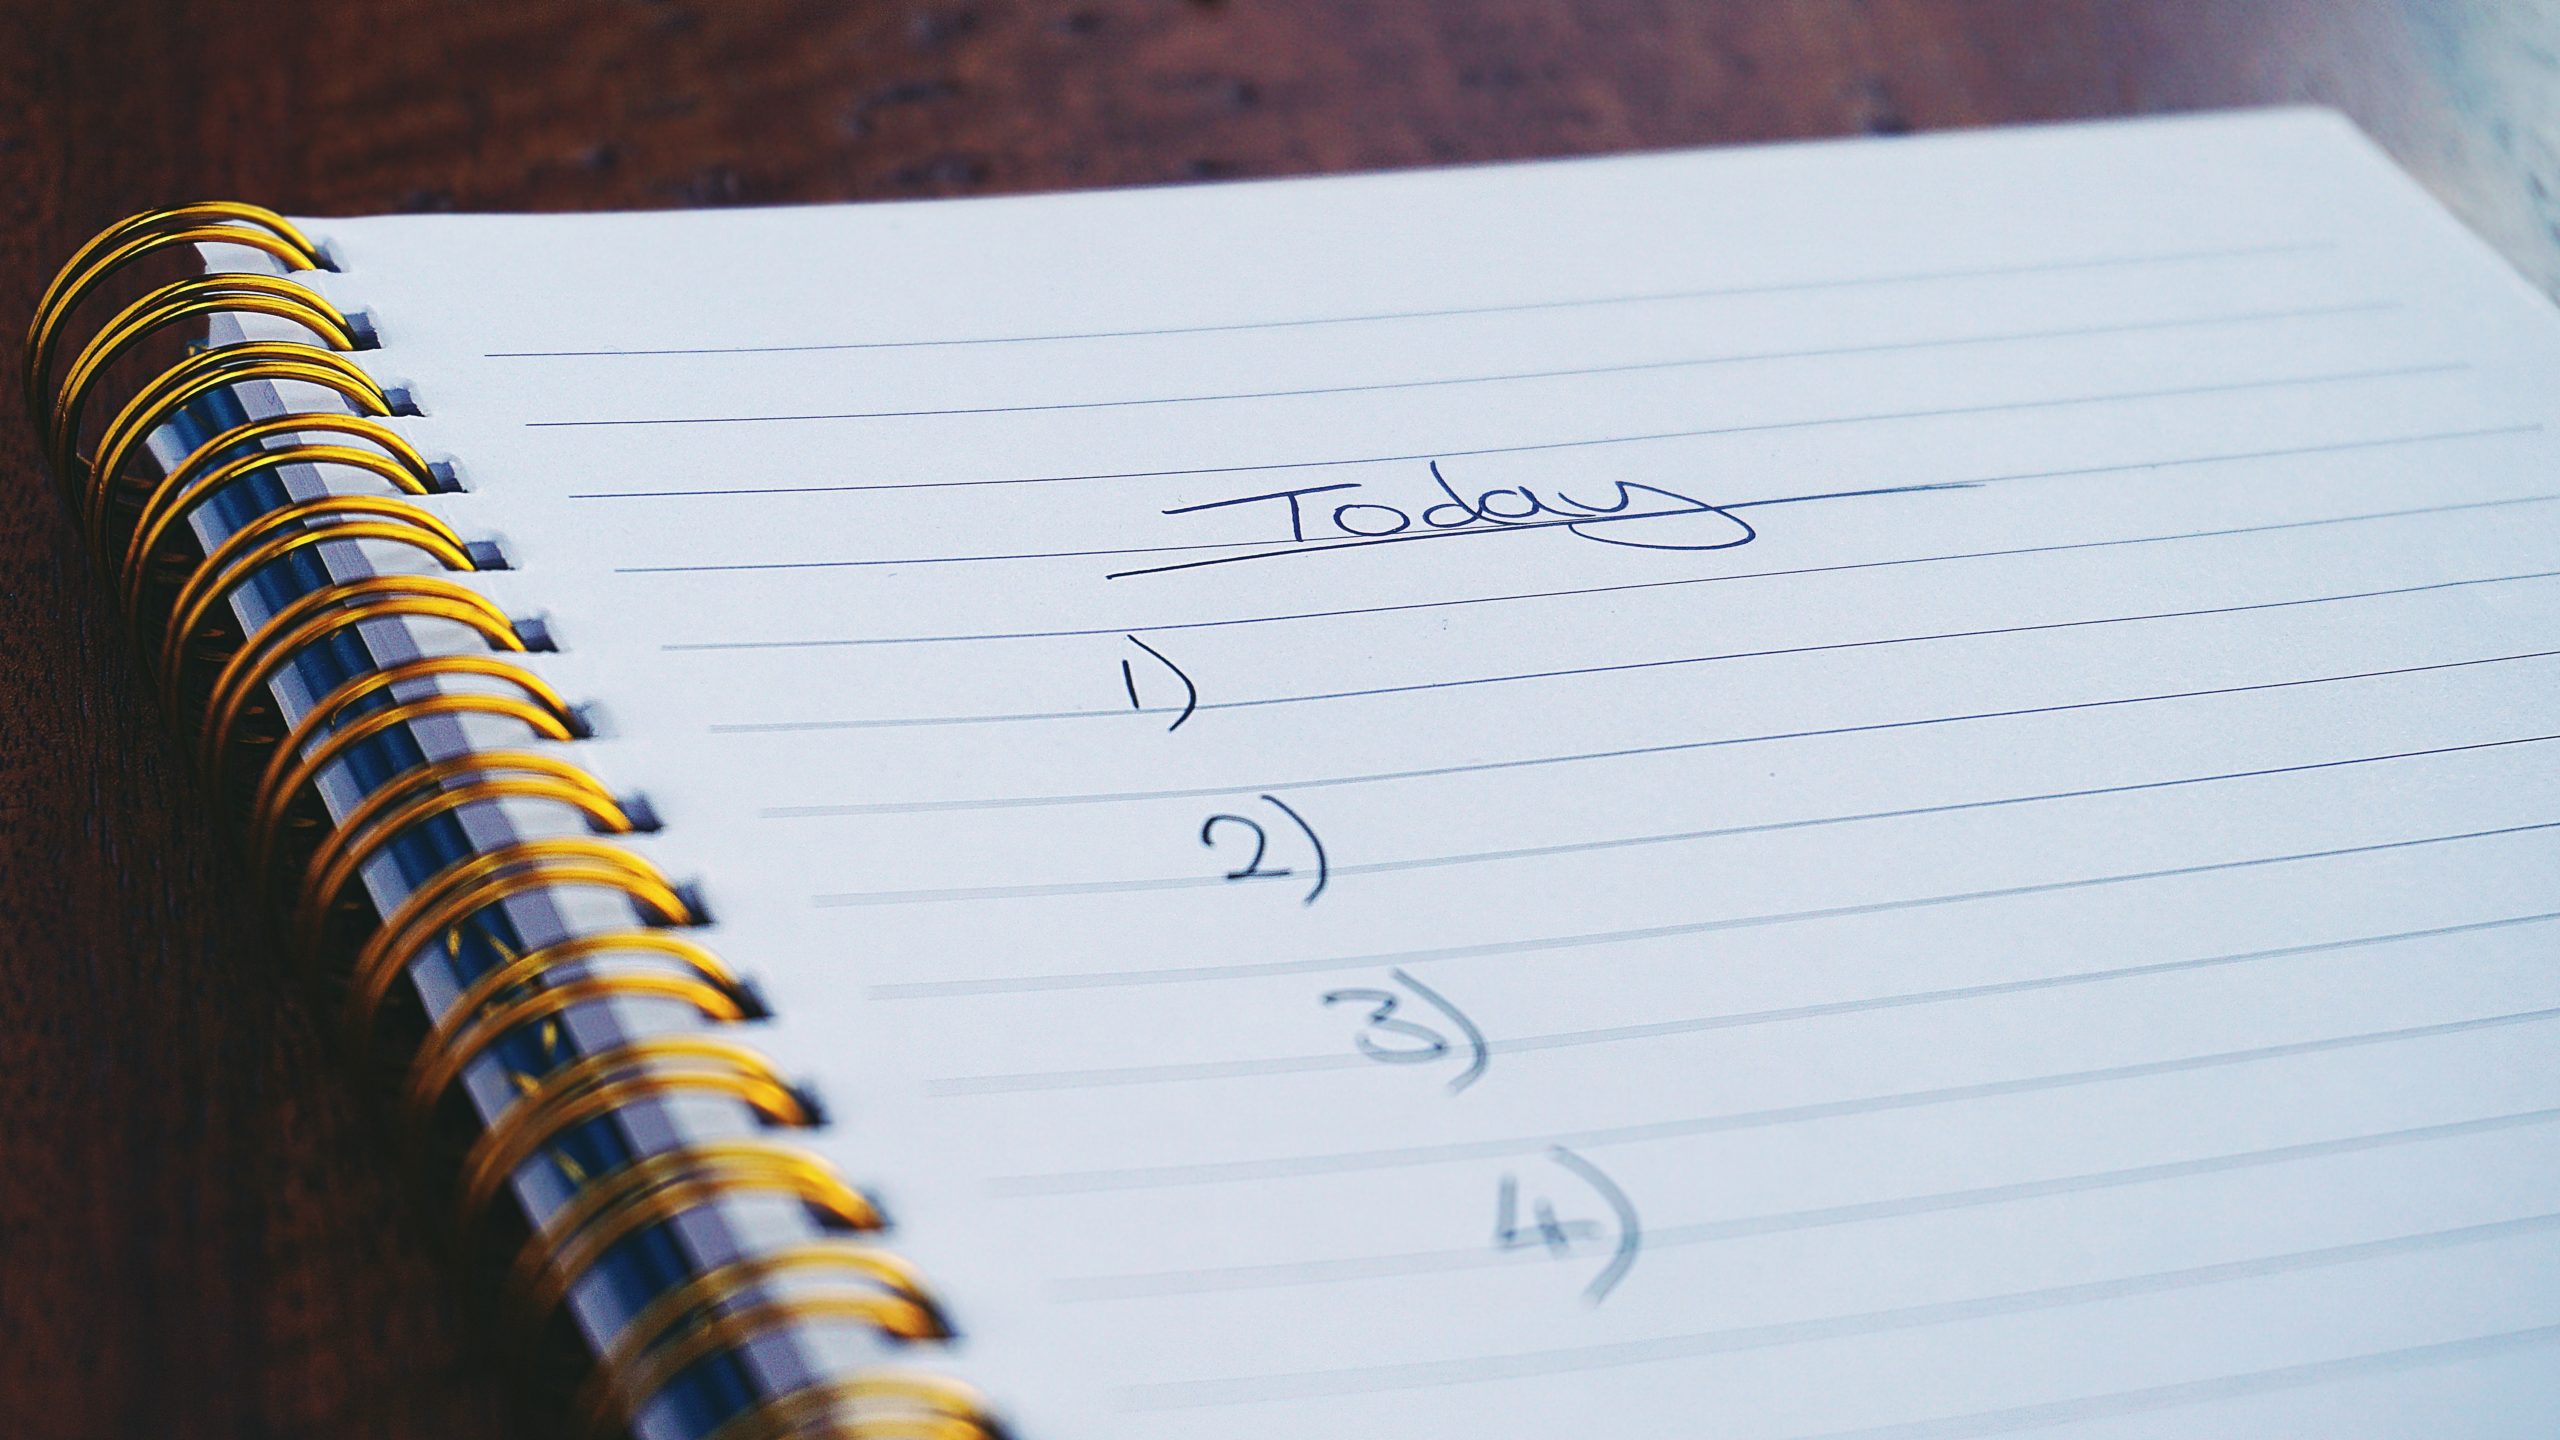 A daily checklist written on a notepad.